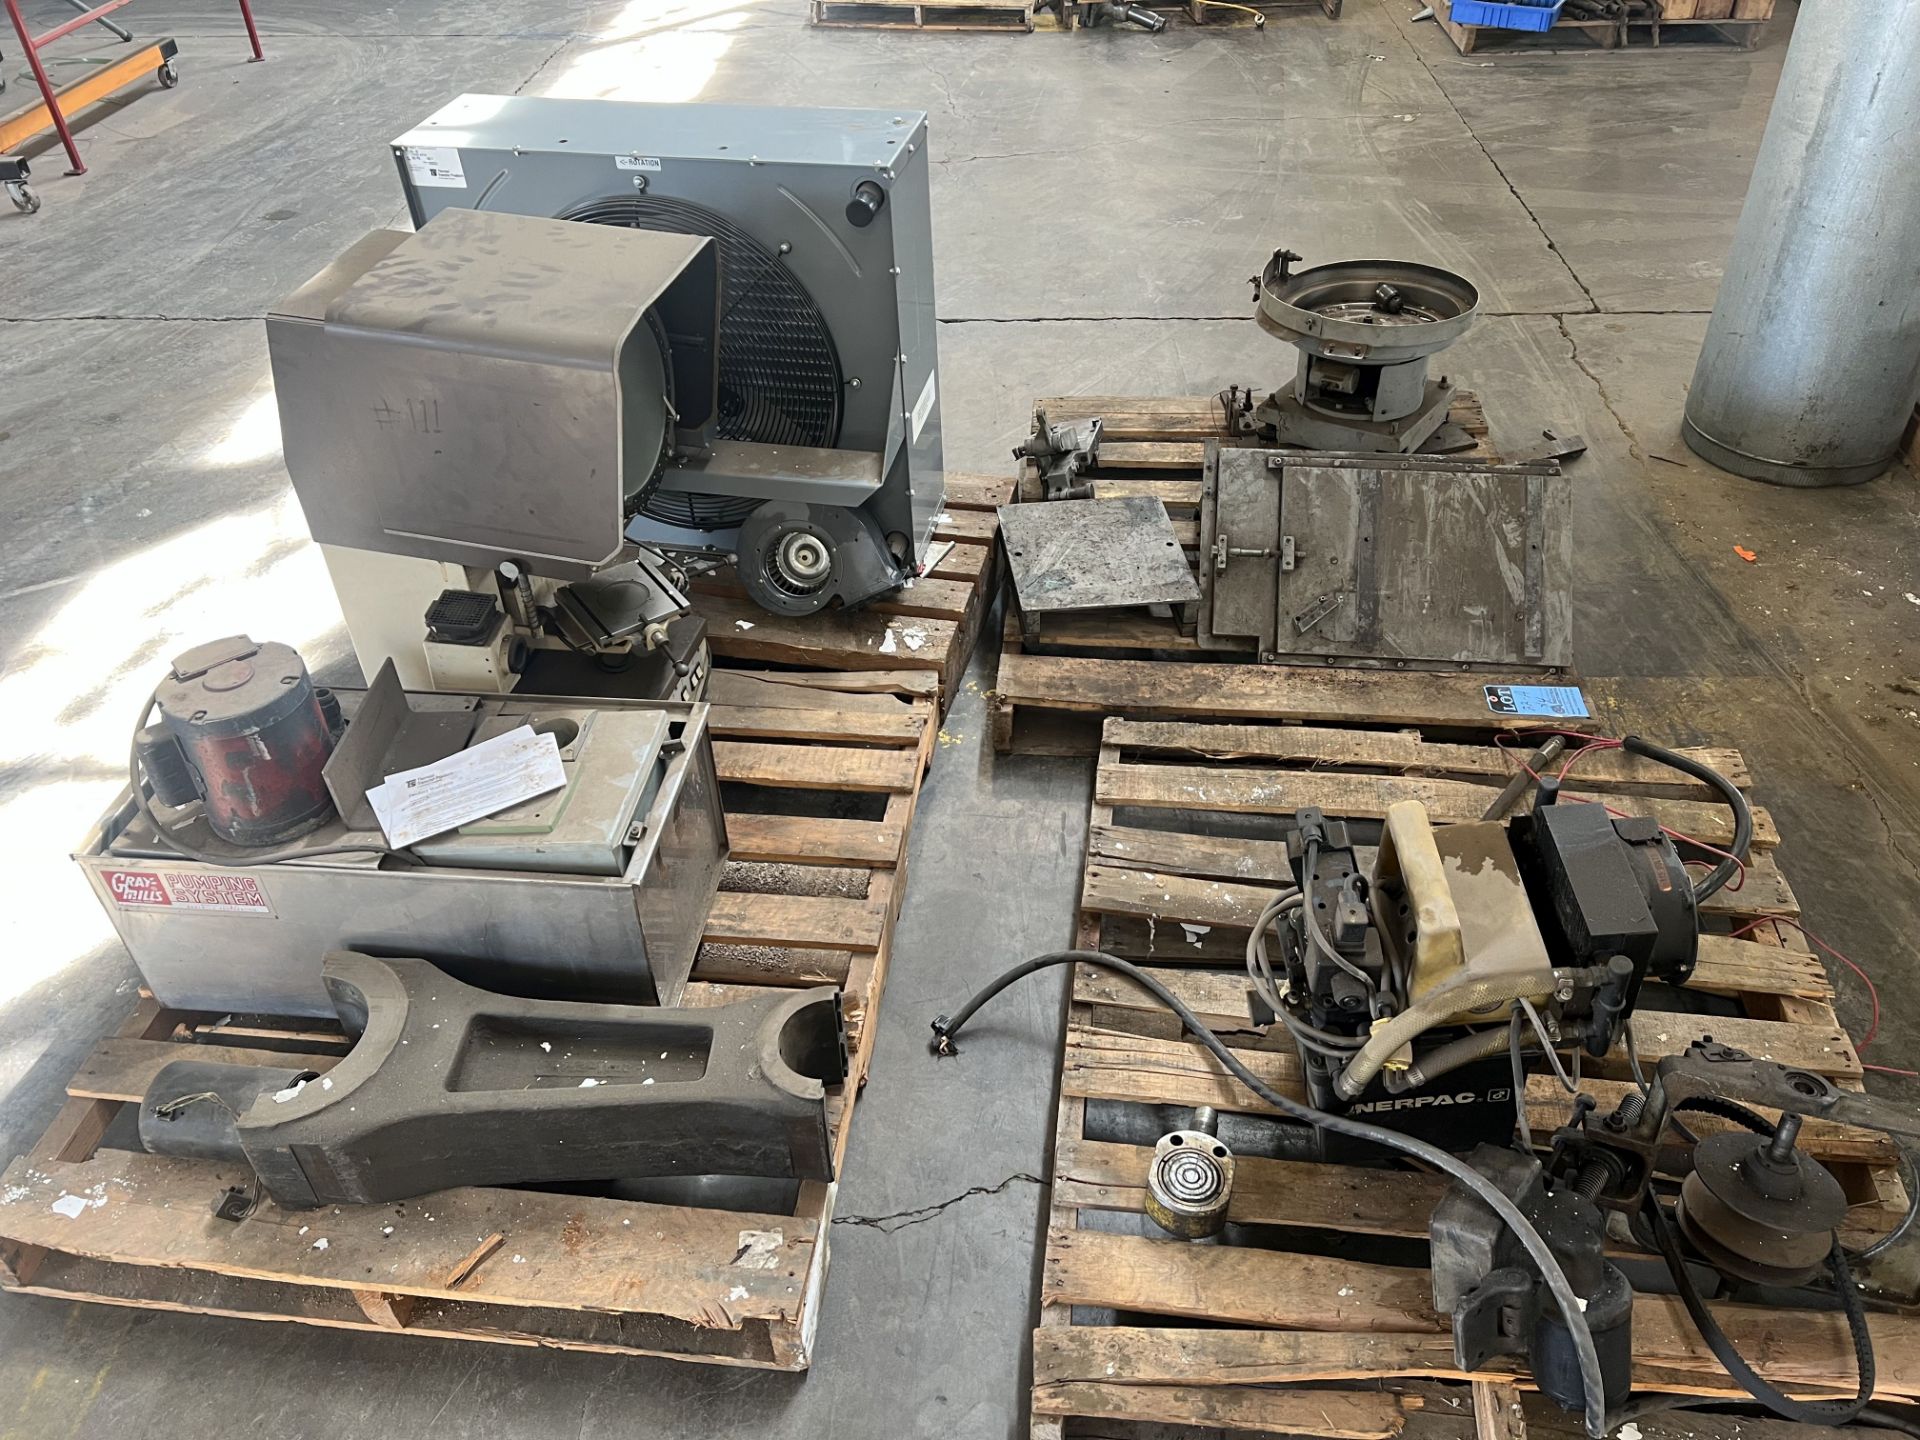 SKIDS OF COMPARATOR, BOWL FEEDER, ENERPAC UNIT, OTHER **For convenience, the loading fee of $50.00